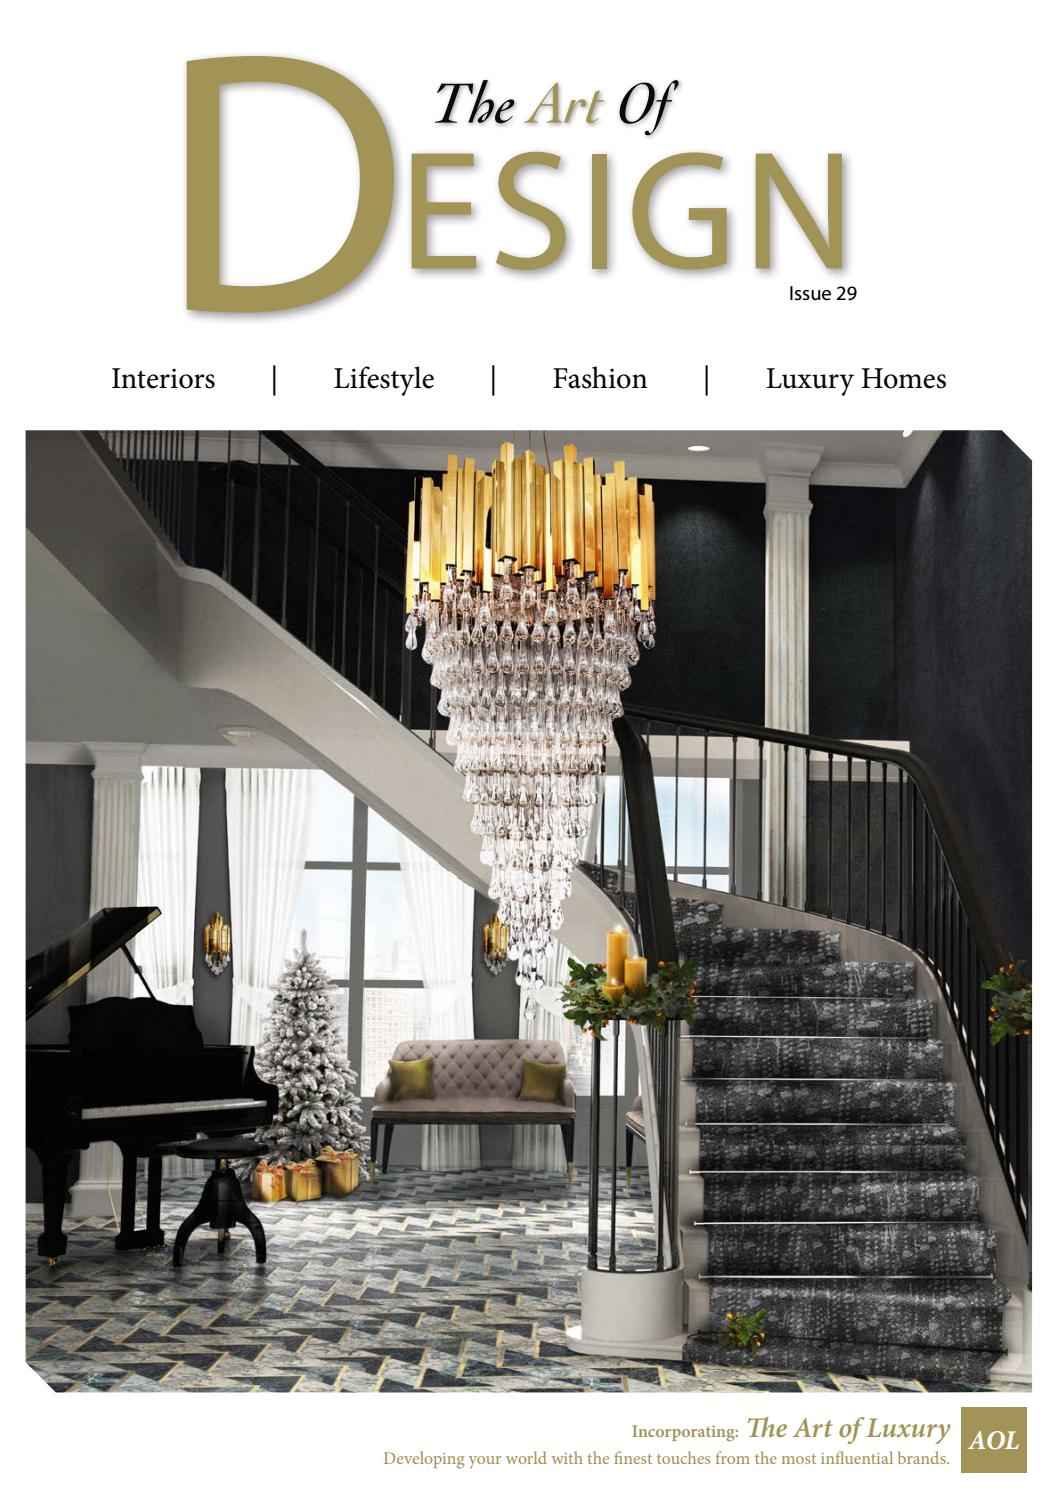 Fireplace Tile Design 2 Best Of the Art Of Design issue 29 2017 by Mh Media Global issuu